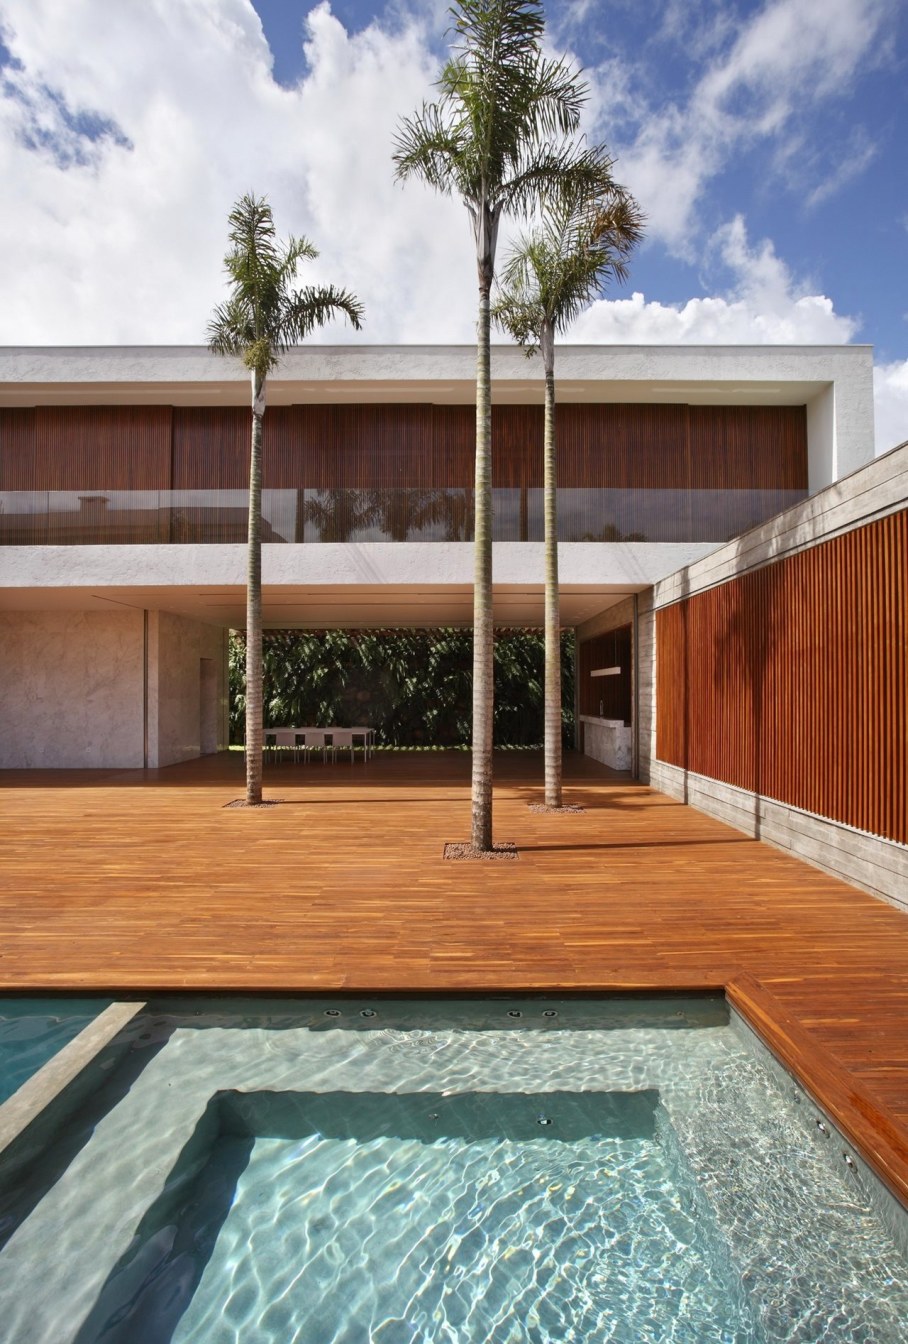 AN House From Studio Guilherme Torres - Swimming pool 3